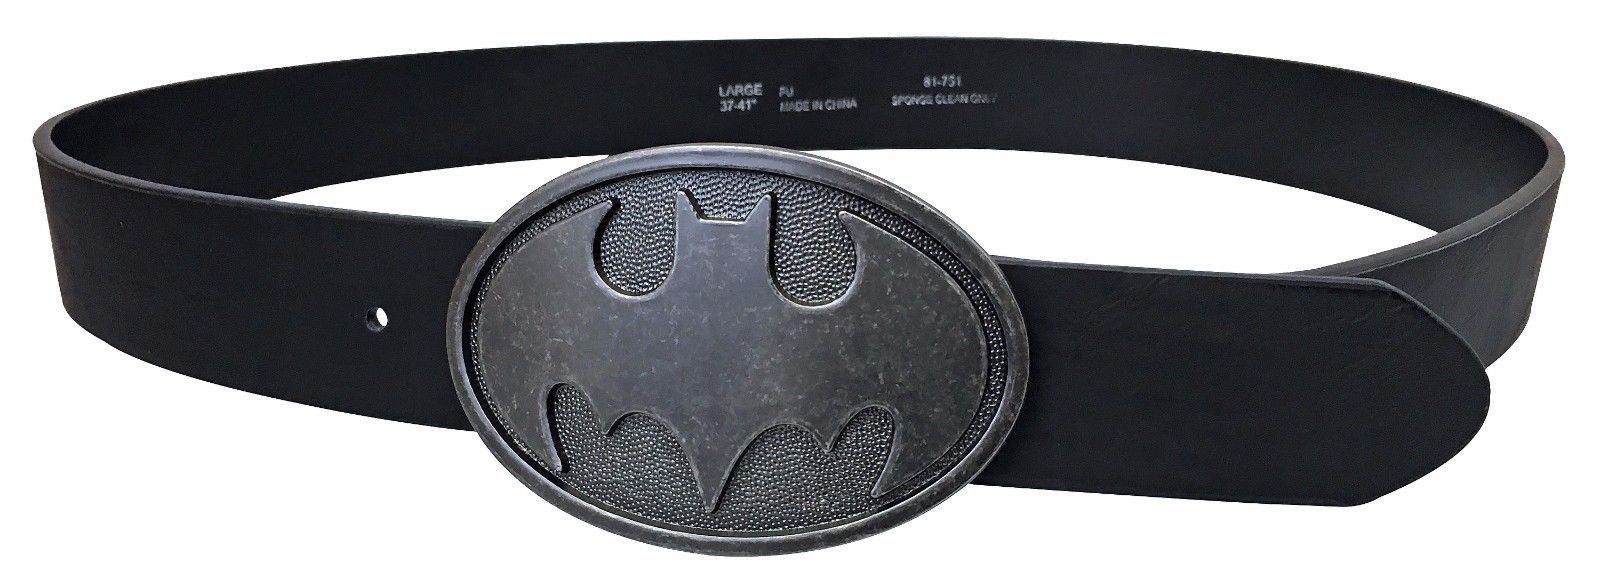 DC Comics - 1.5 inch 40mm Adjustable Synthetic Leather Belt with Batman Buckle